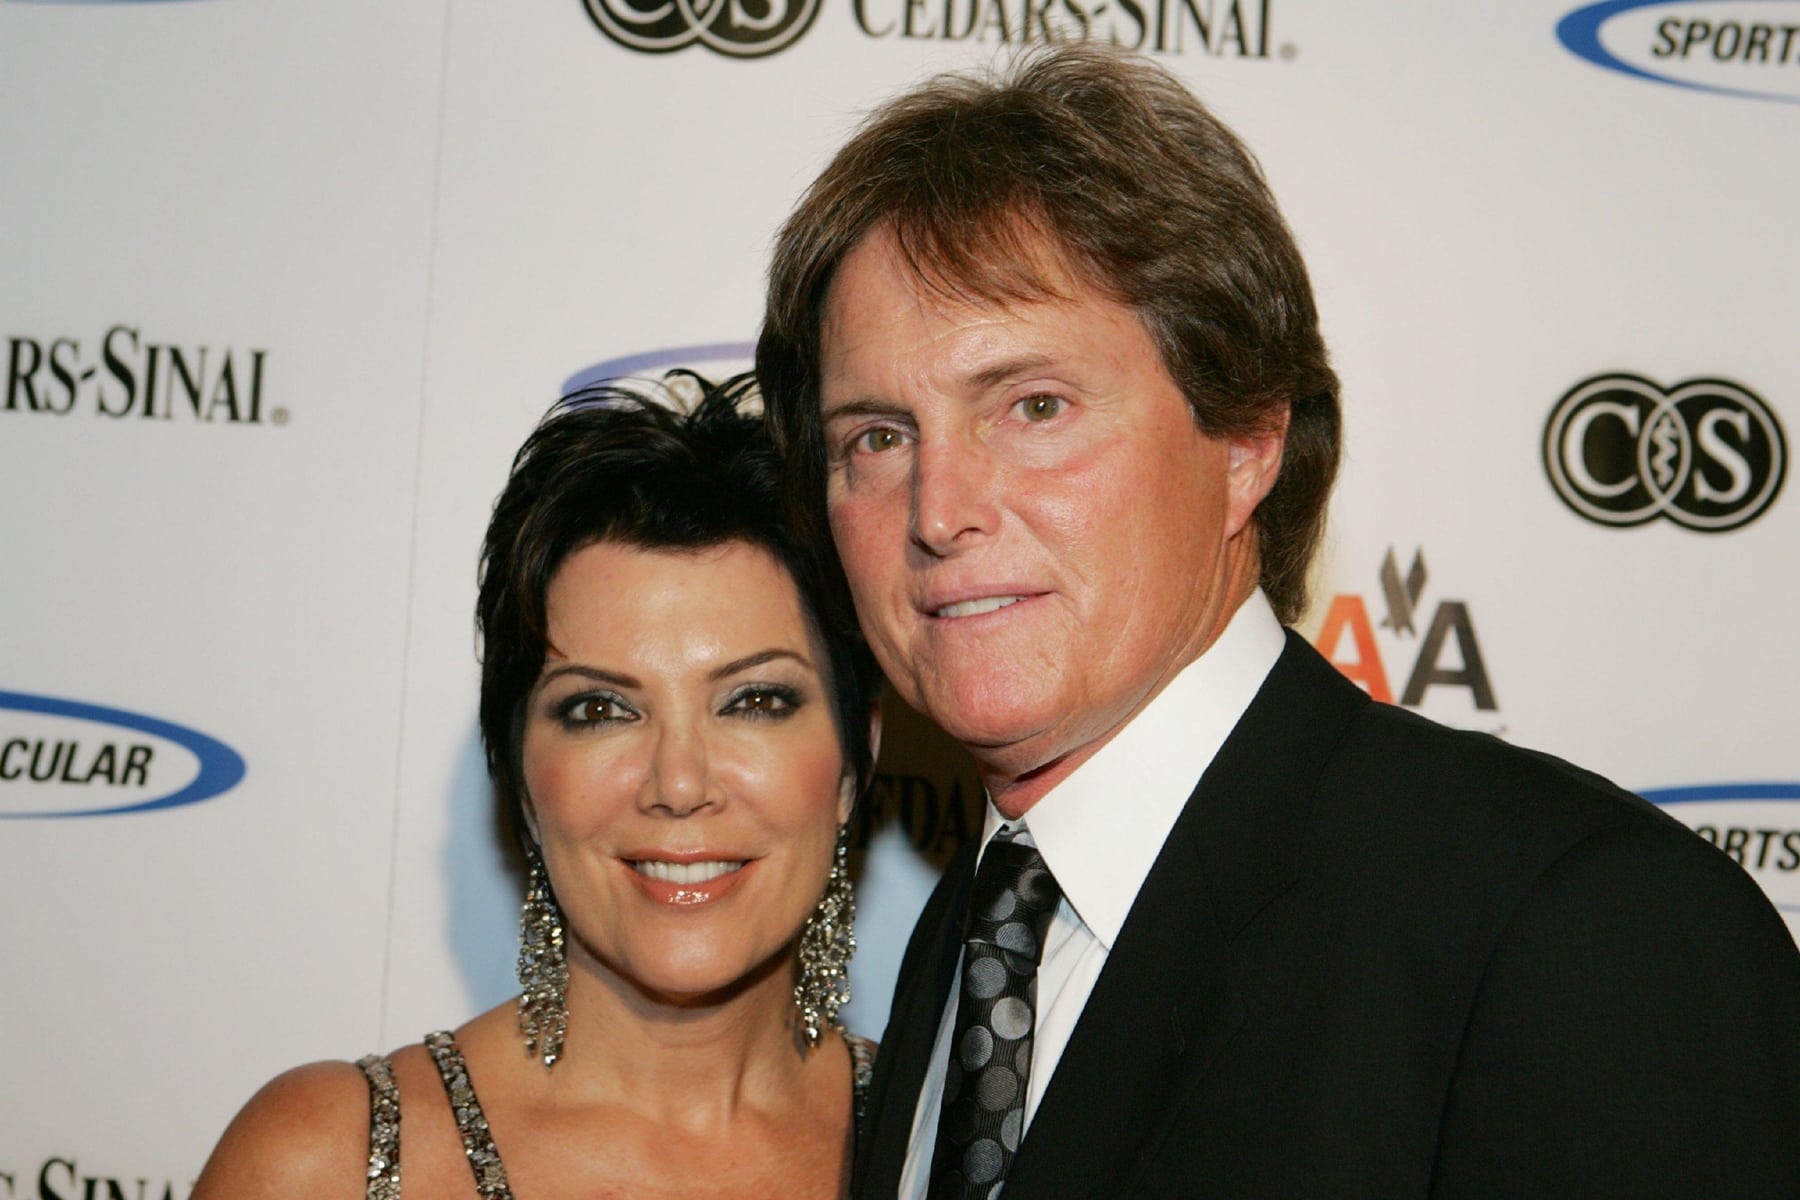 Kris Jenner and Bruce Jenner were married from April 21, 1991 to March 23, 2015